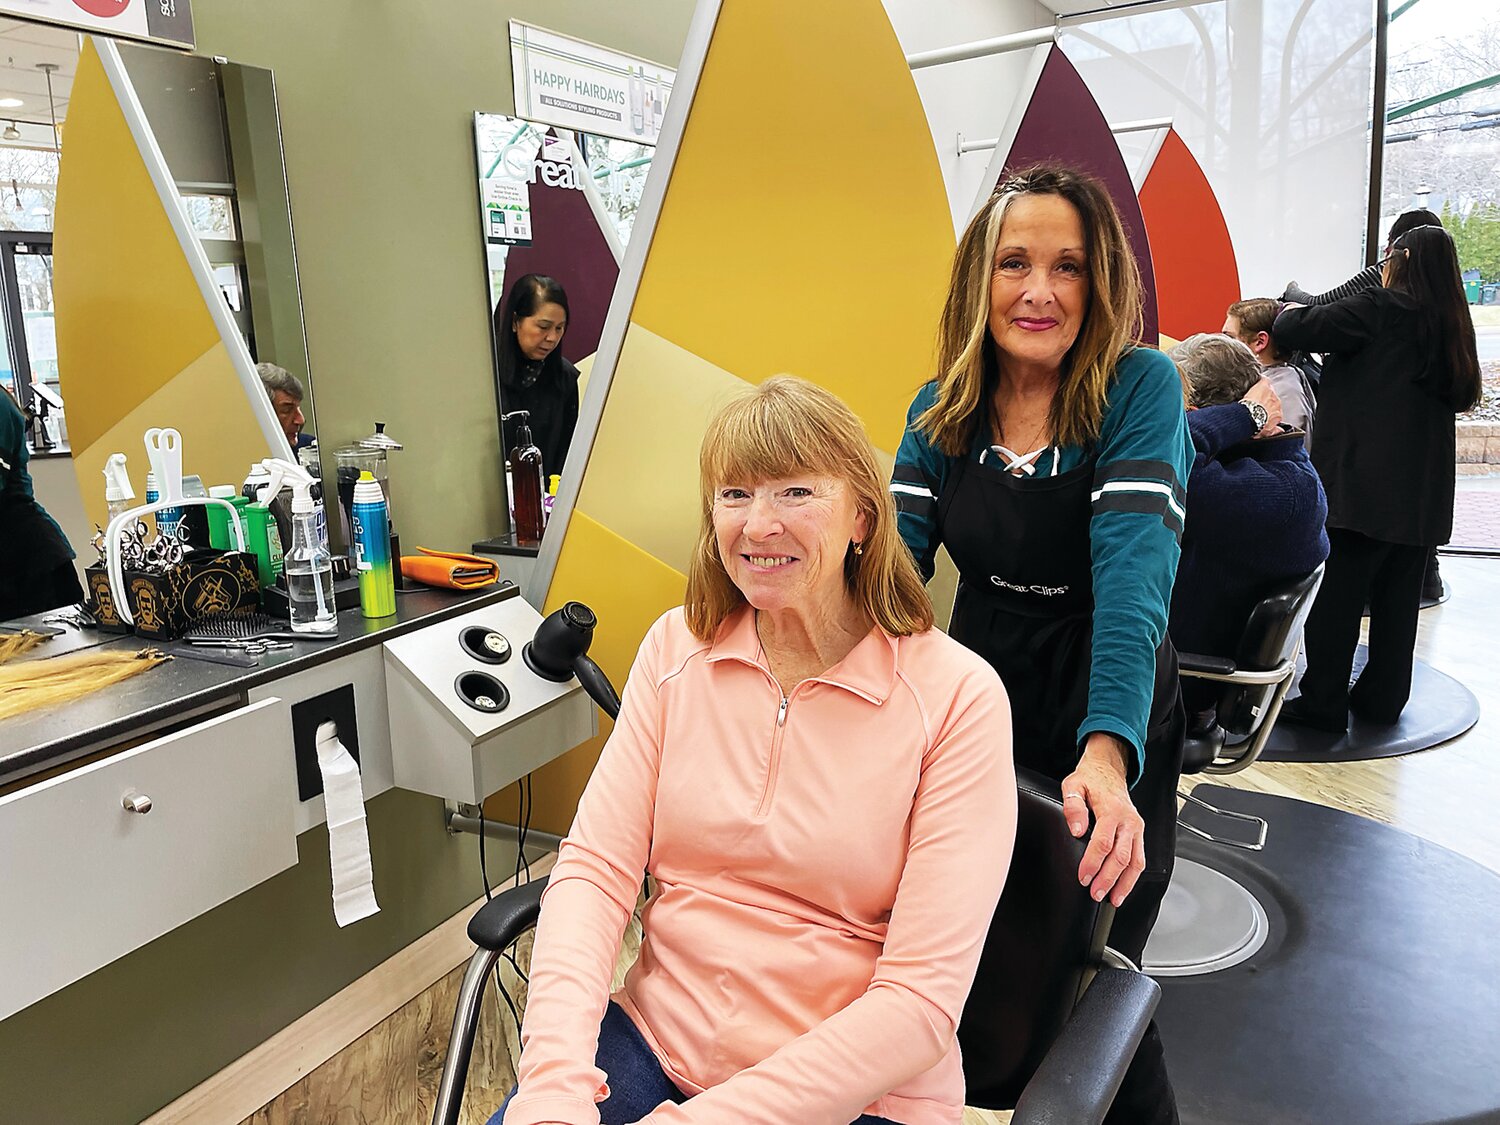 Jane Jones, seated, recently donated 13 inches of hair to Wigs for Kids, which serves children experiencing hair loss.